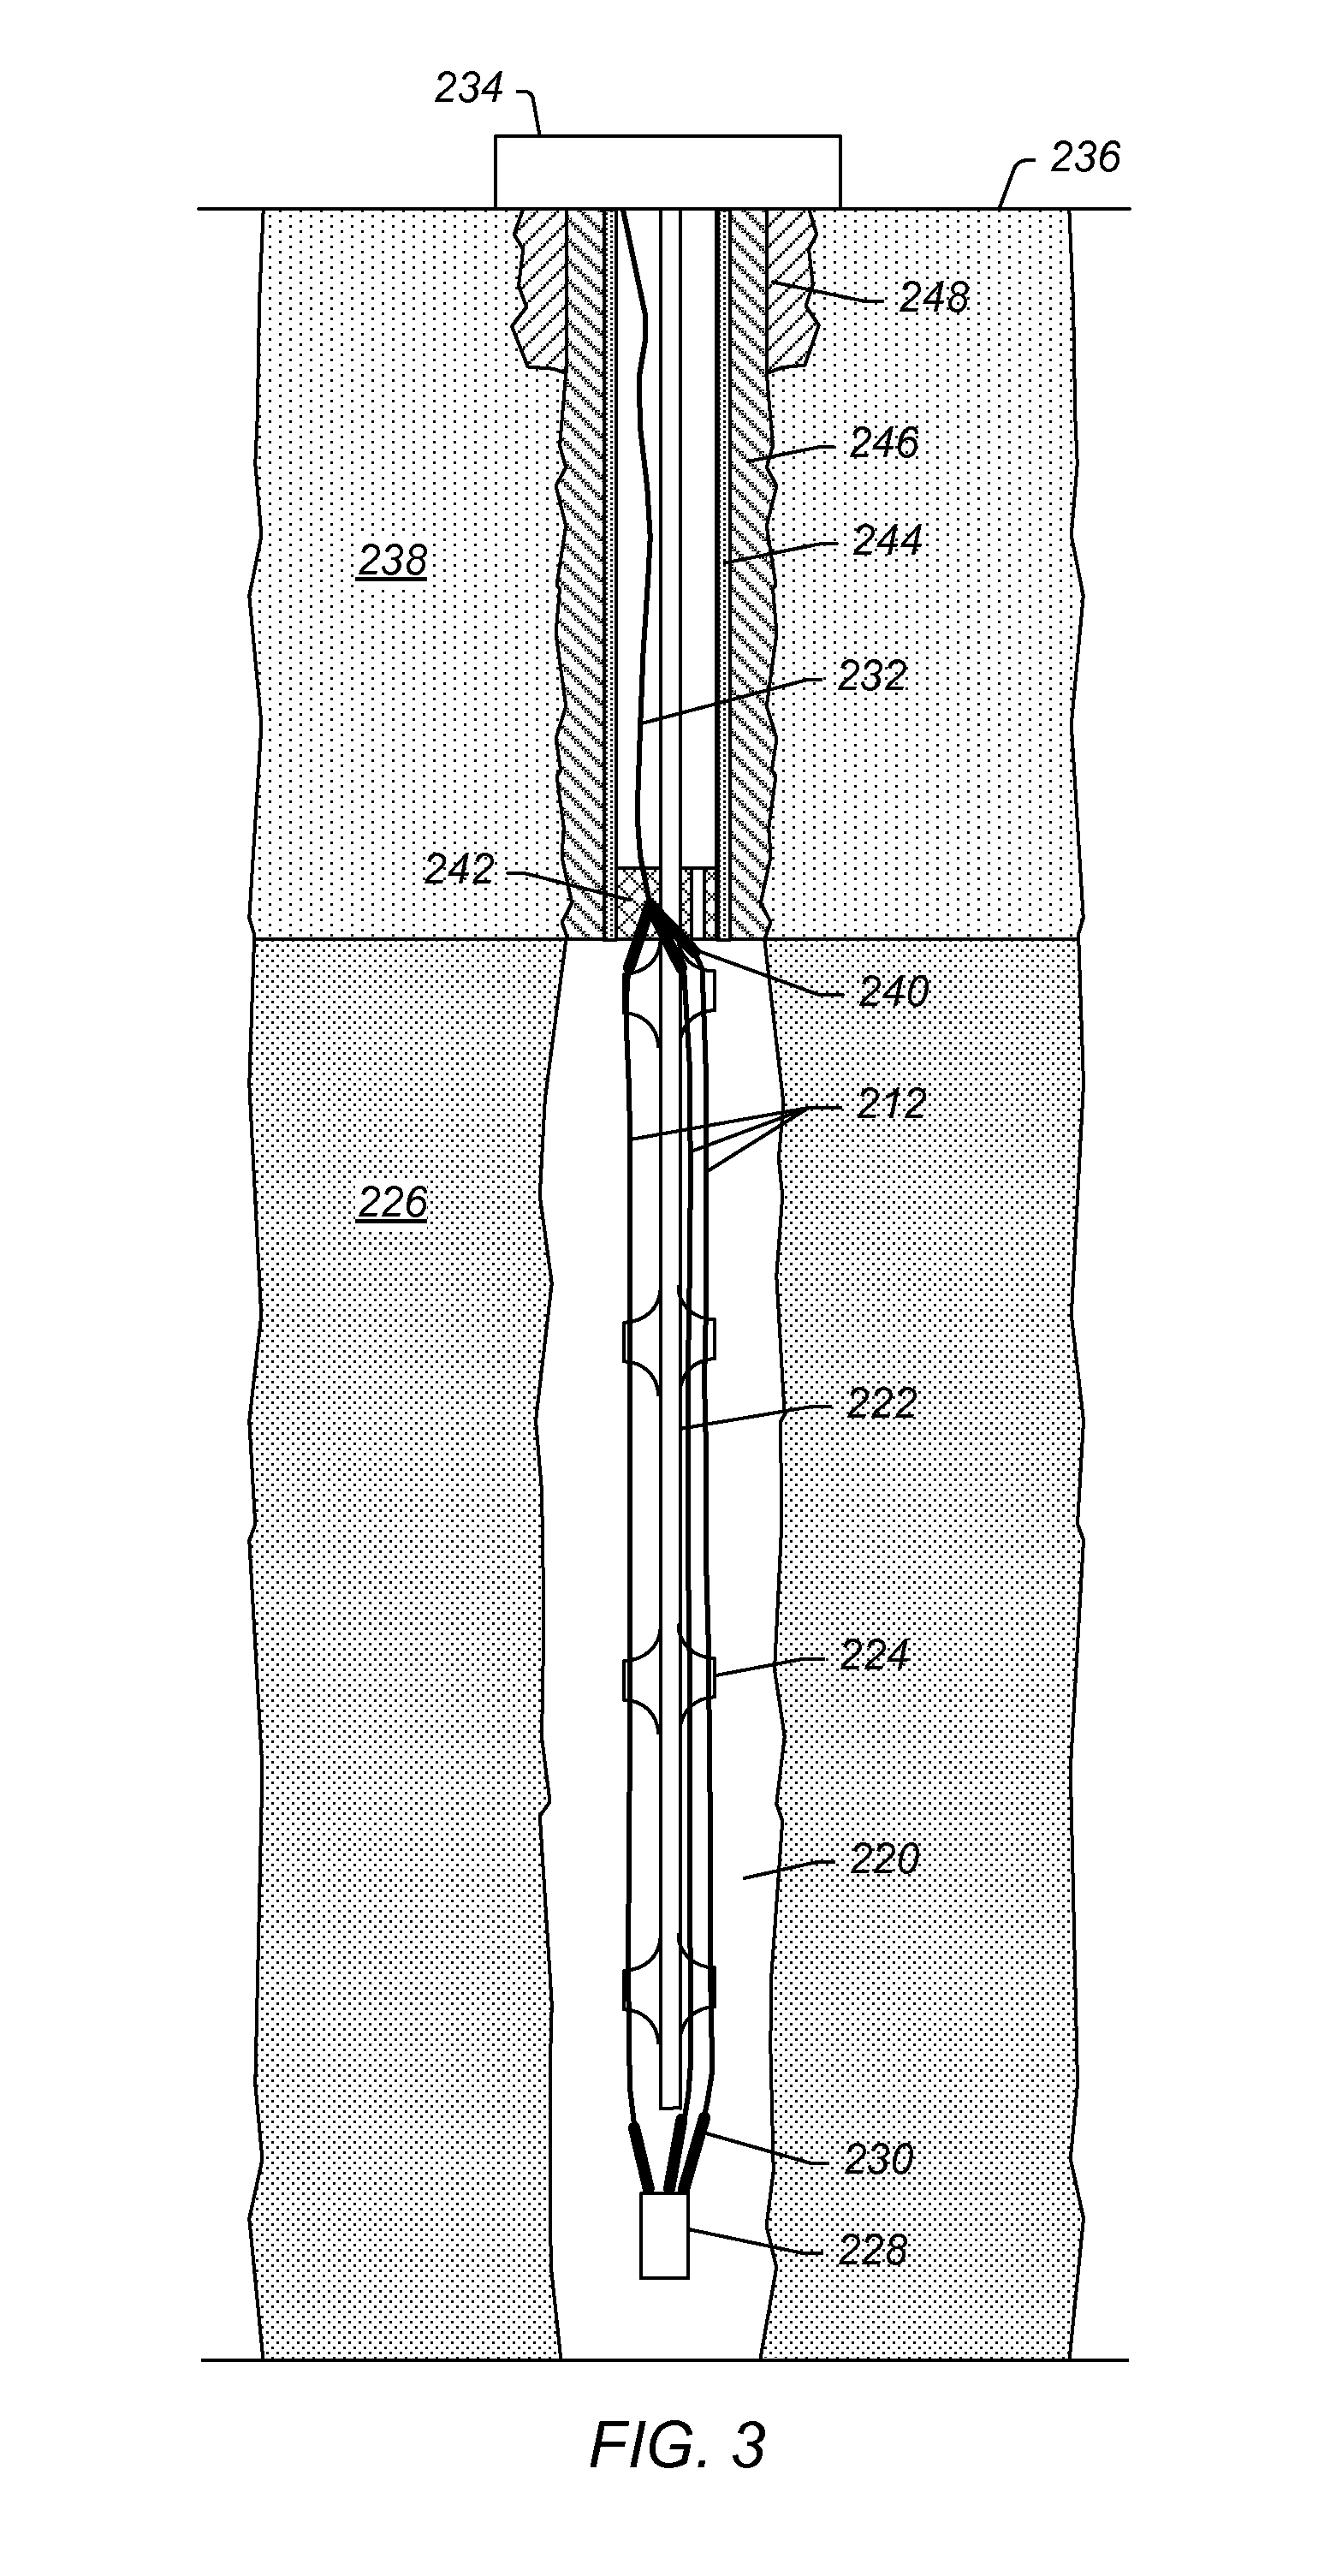 Compaction of electrical insulation for joining insulated conductors